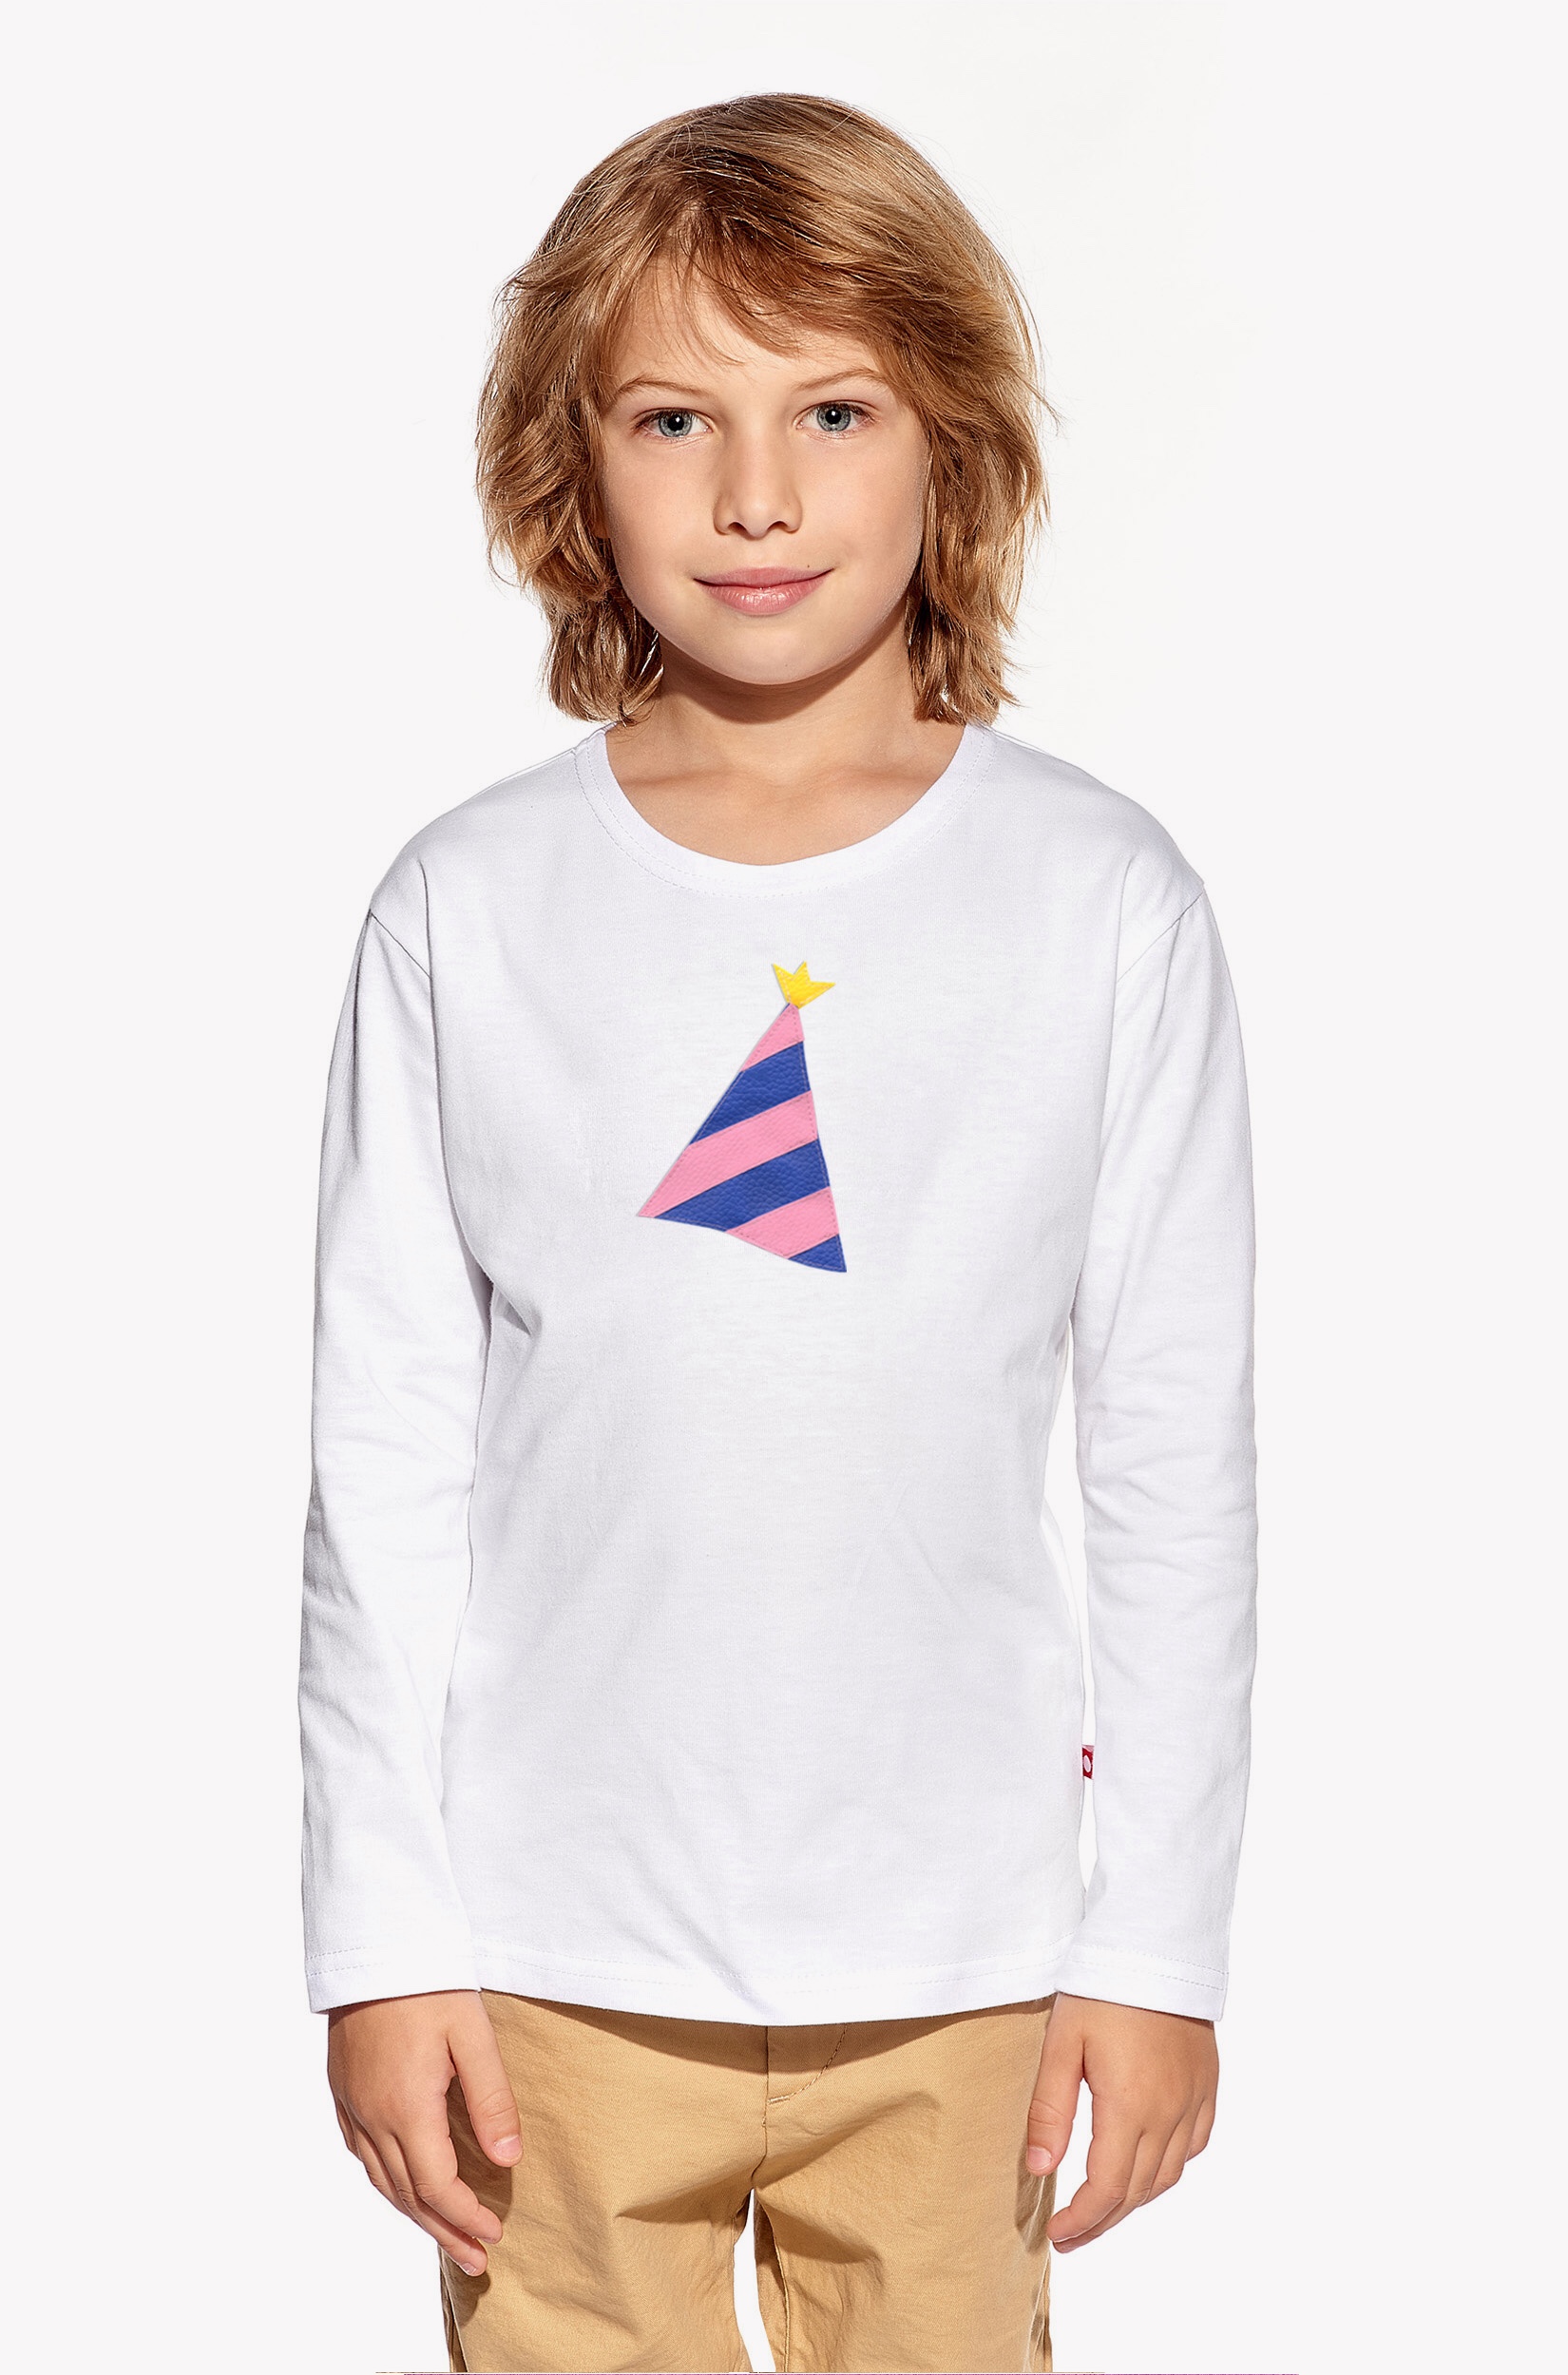 Shirt with party hat